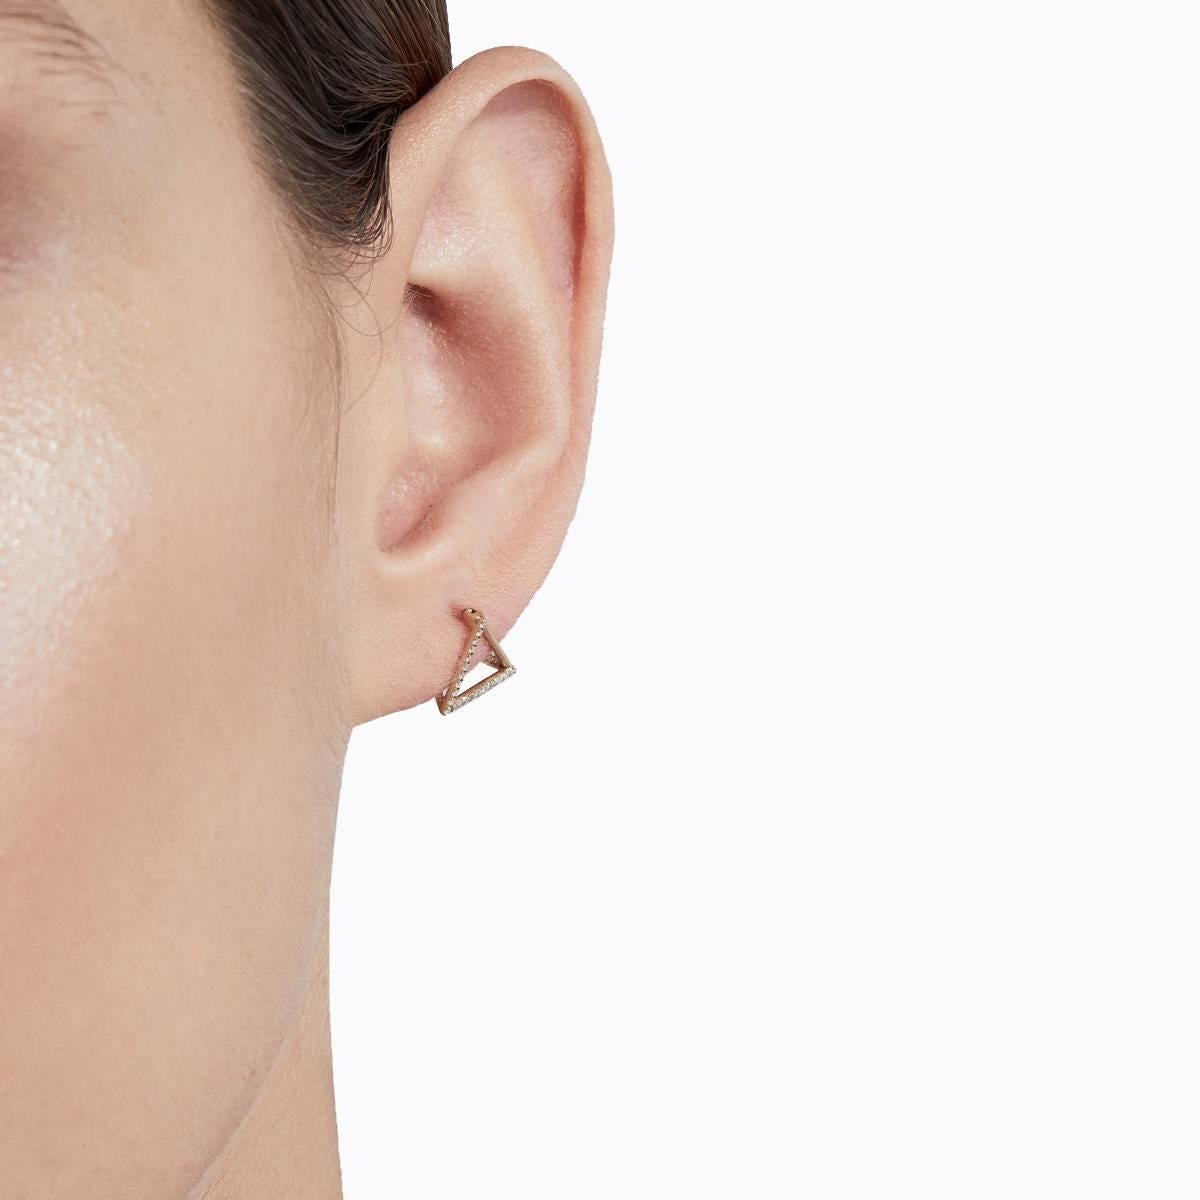 The three dimensional triangle form appears to float seamlessly around the earlobe when worn. Also suitable for cartilage piercings. One side is an earring post and three lines are set with micro diamonds creating a subtle but luxurious effect. 

18